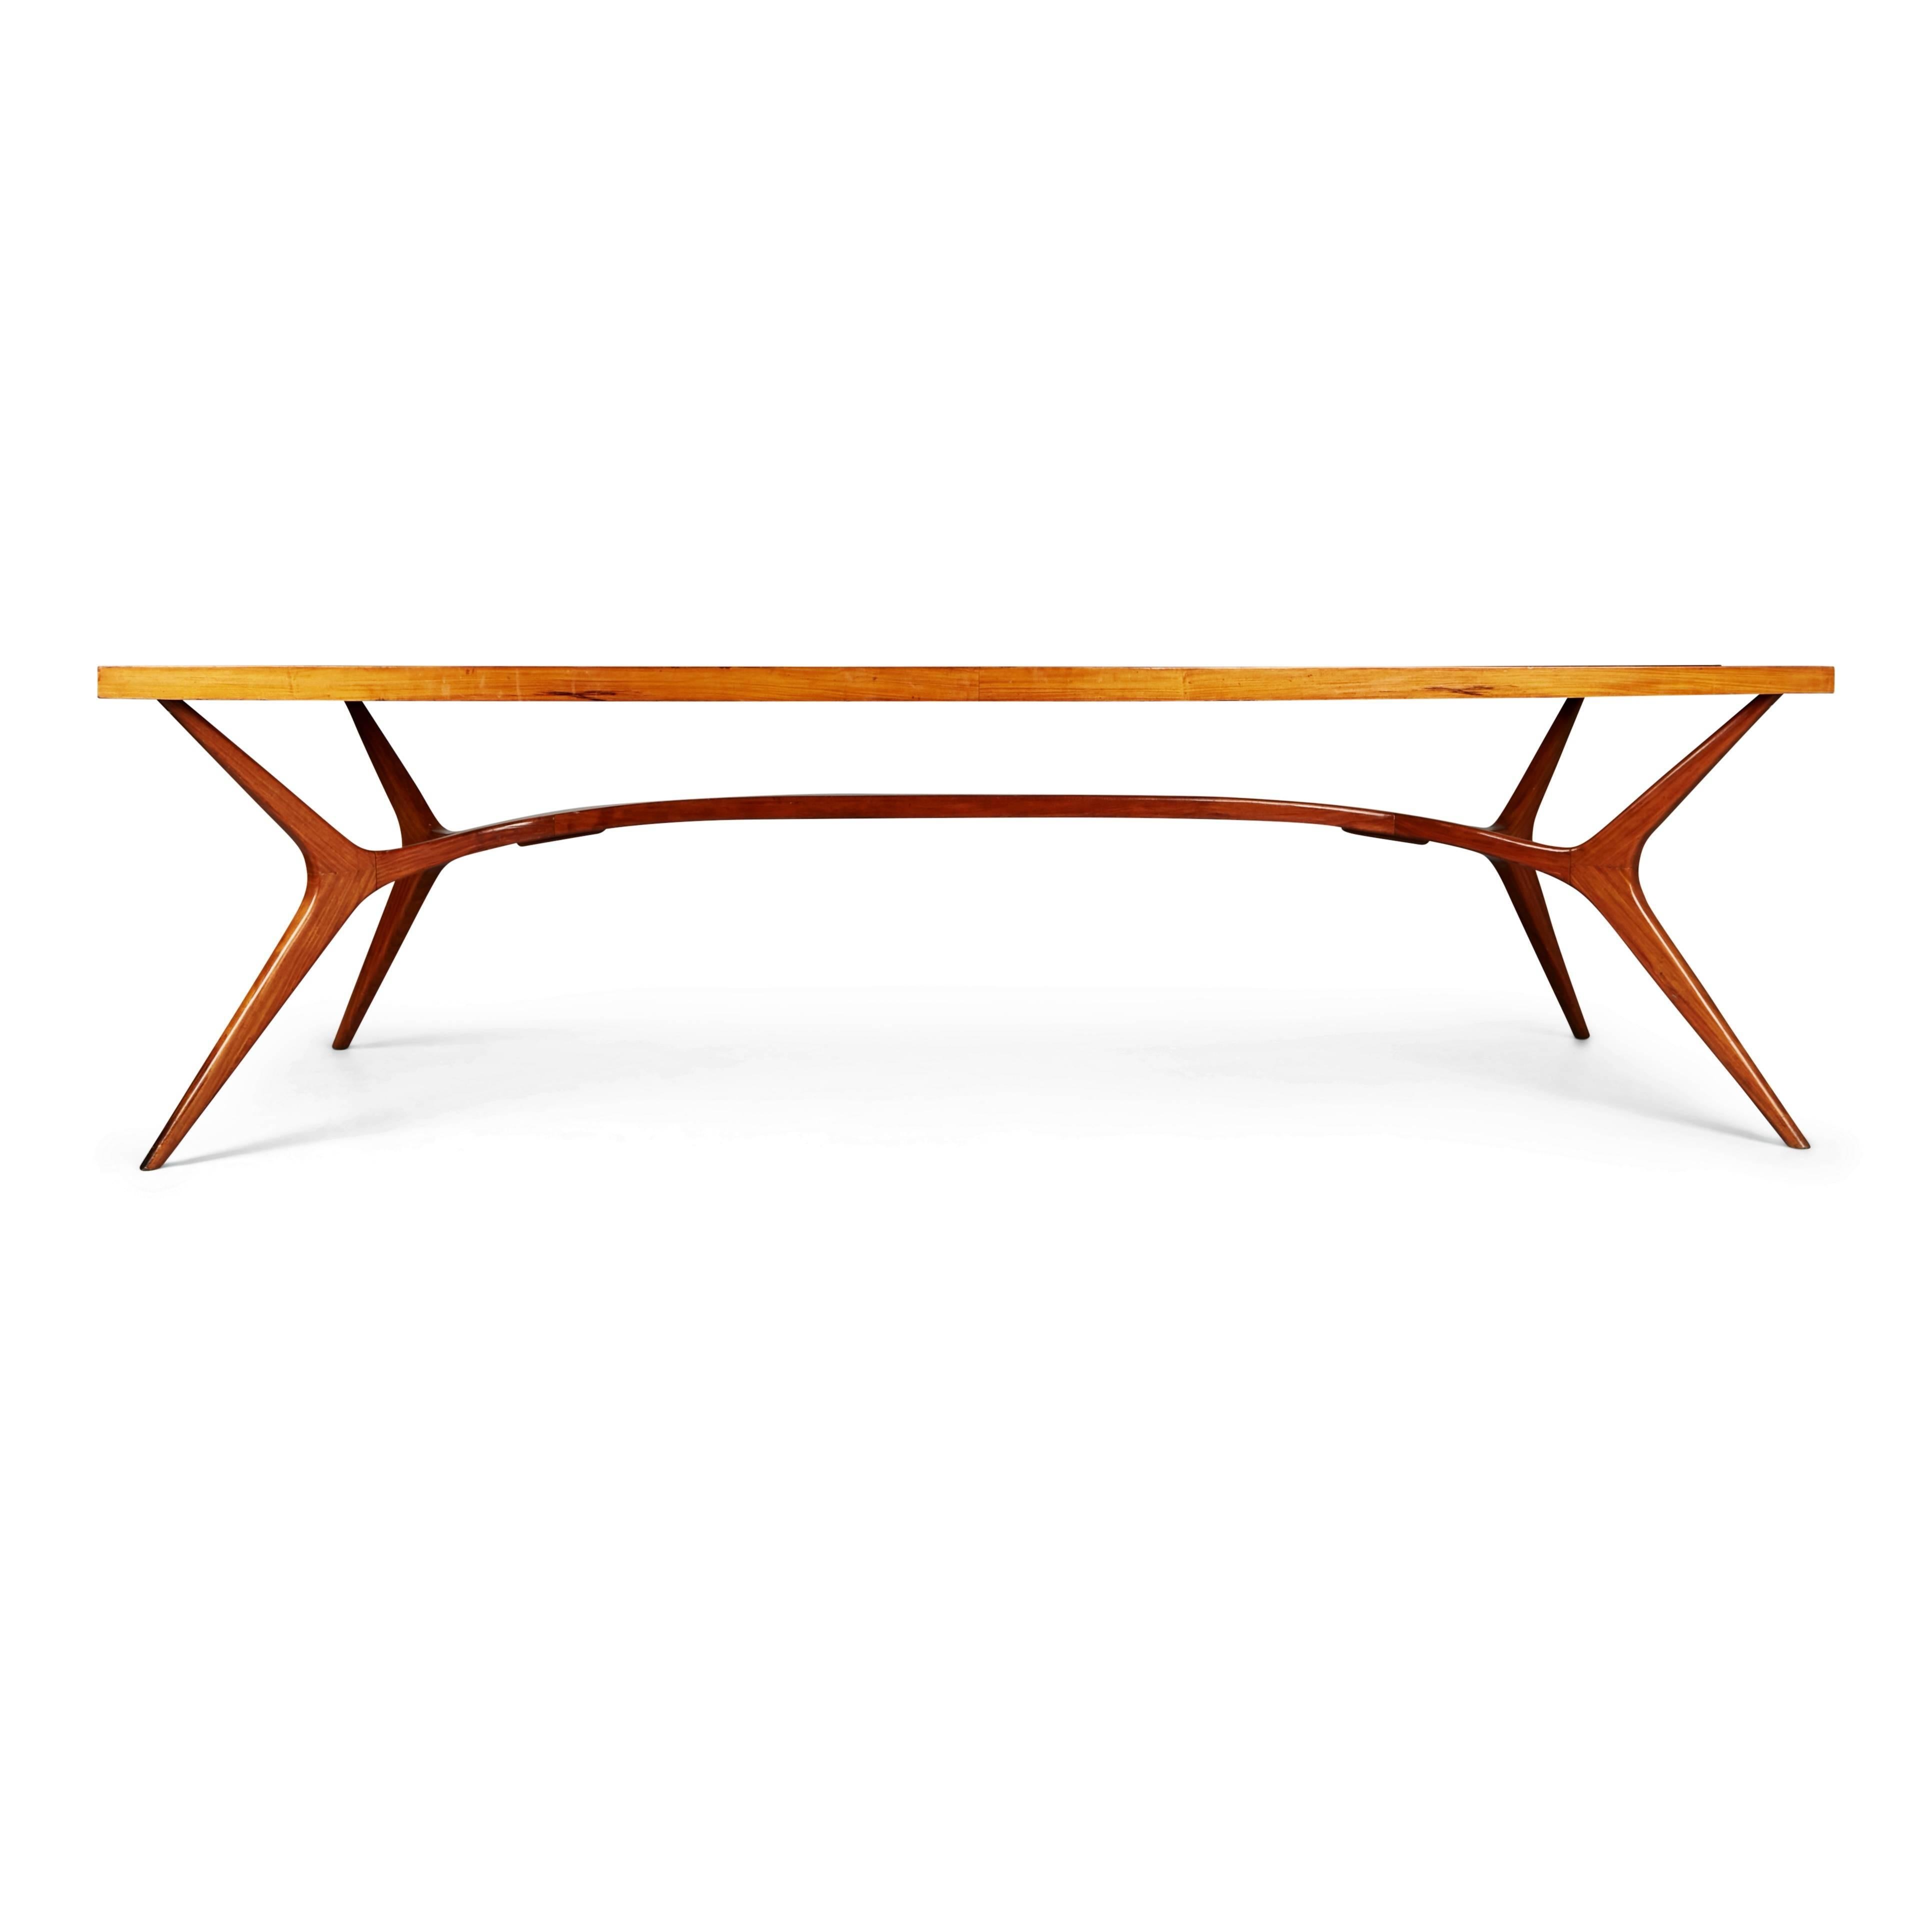 Recently imported from a private collector in Brazil, this extraordinary dining table embodies the use of curvaceous lines and soft shapes that Scapinelli was well known for. Featuring a solid Peroba de Campos base supporting a vast inset glass top